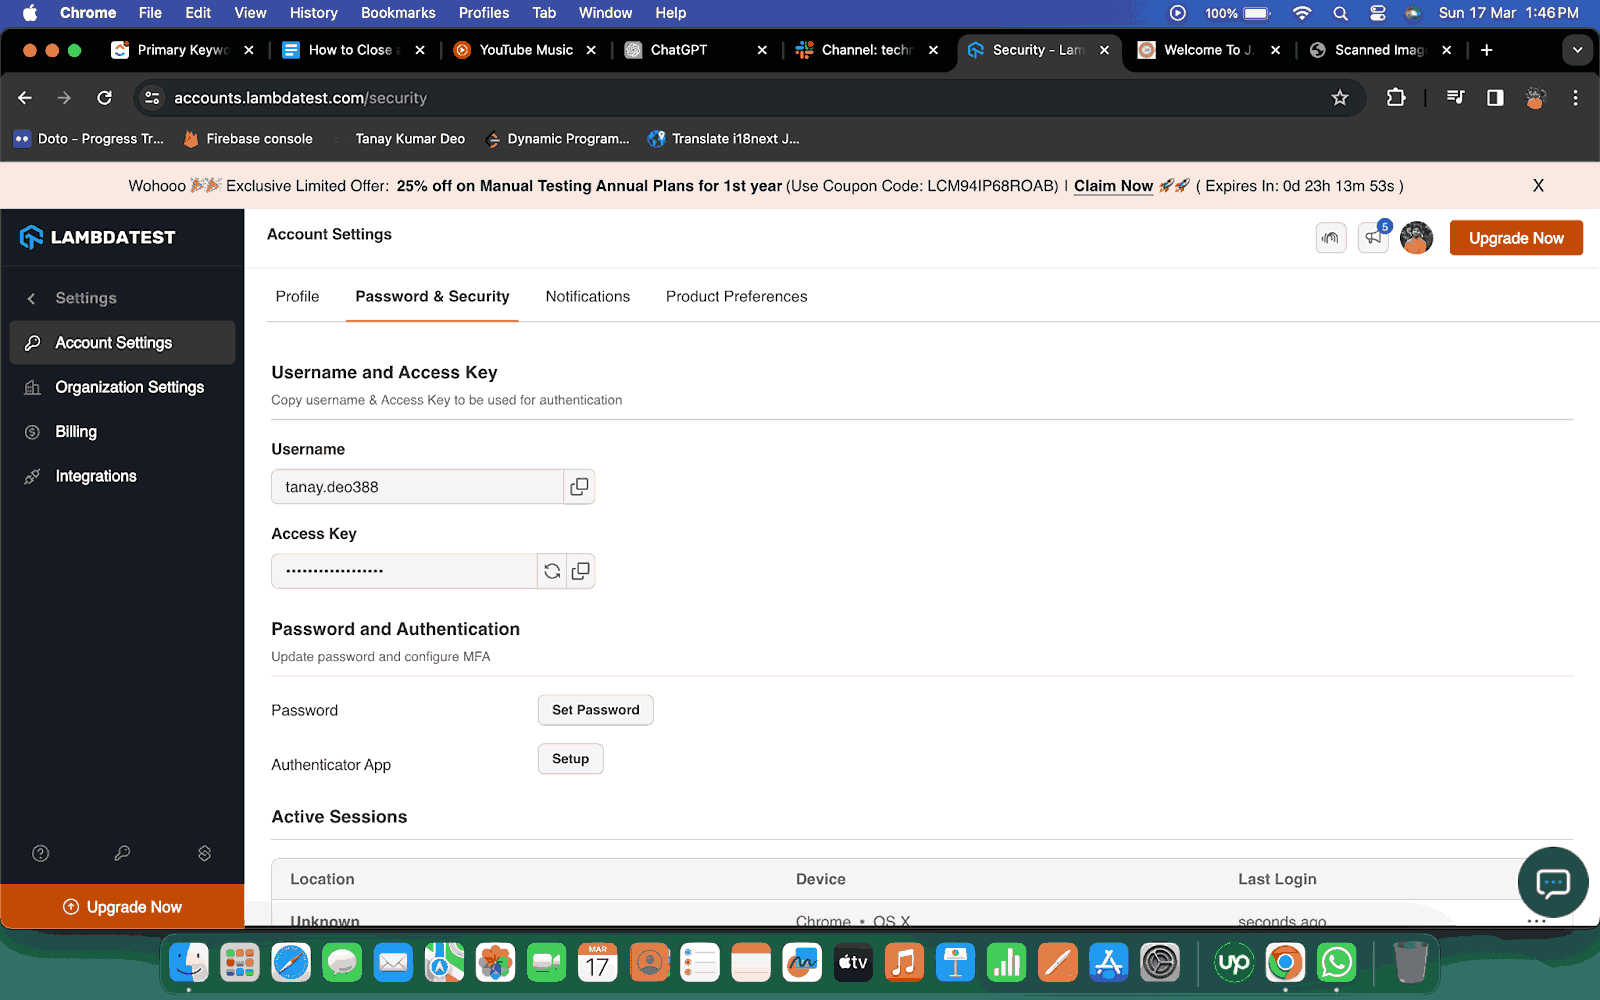  these credentials from the LambdaTest dashboard